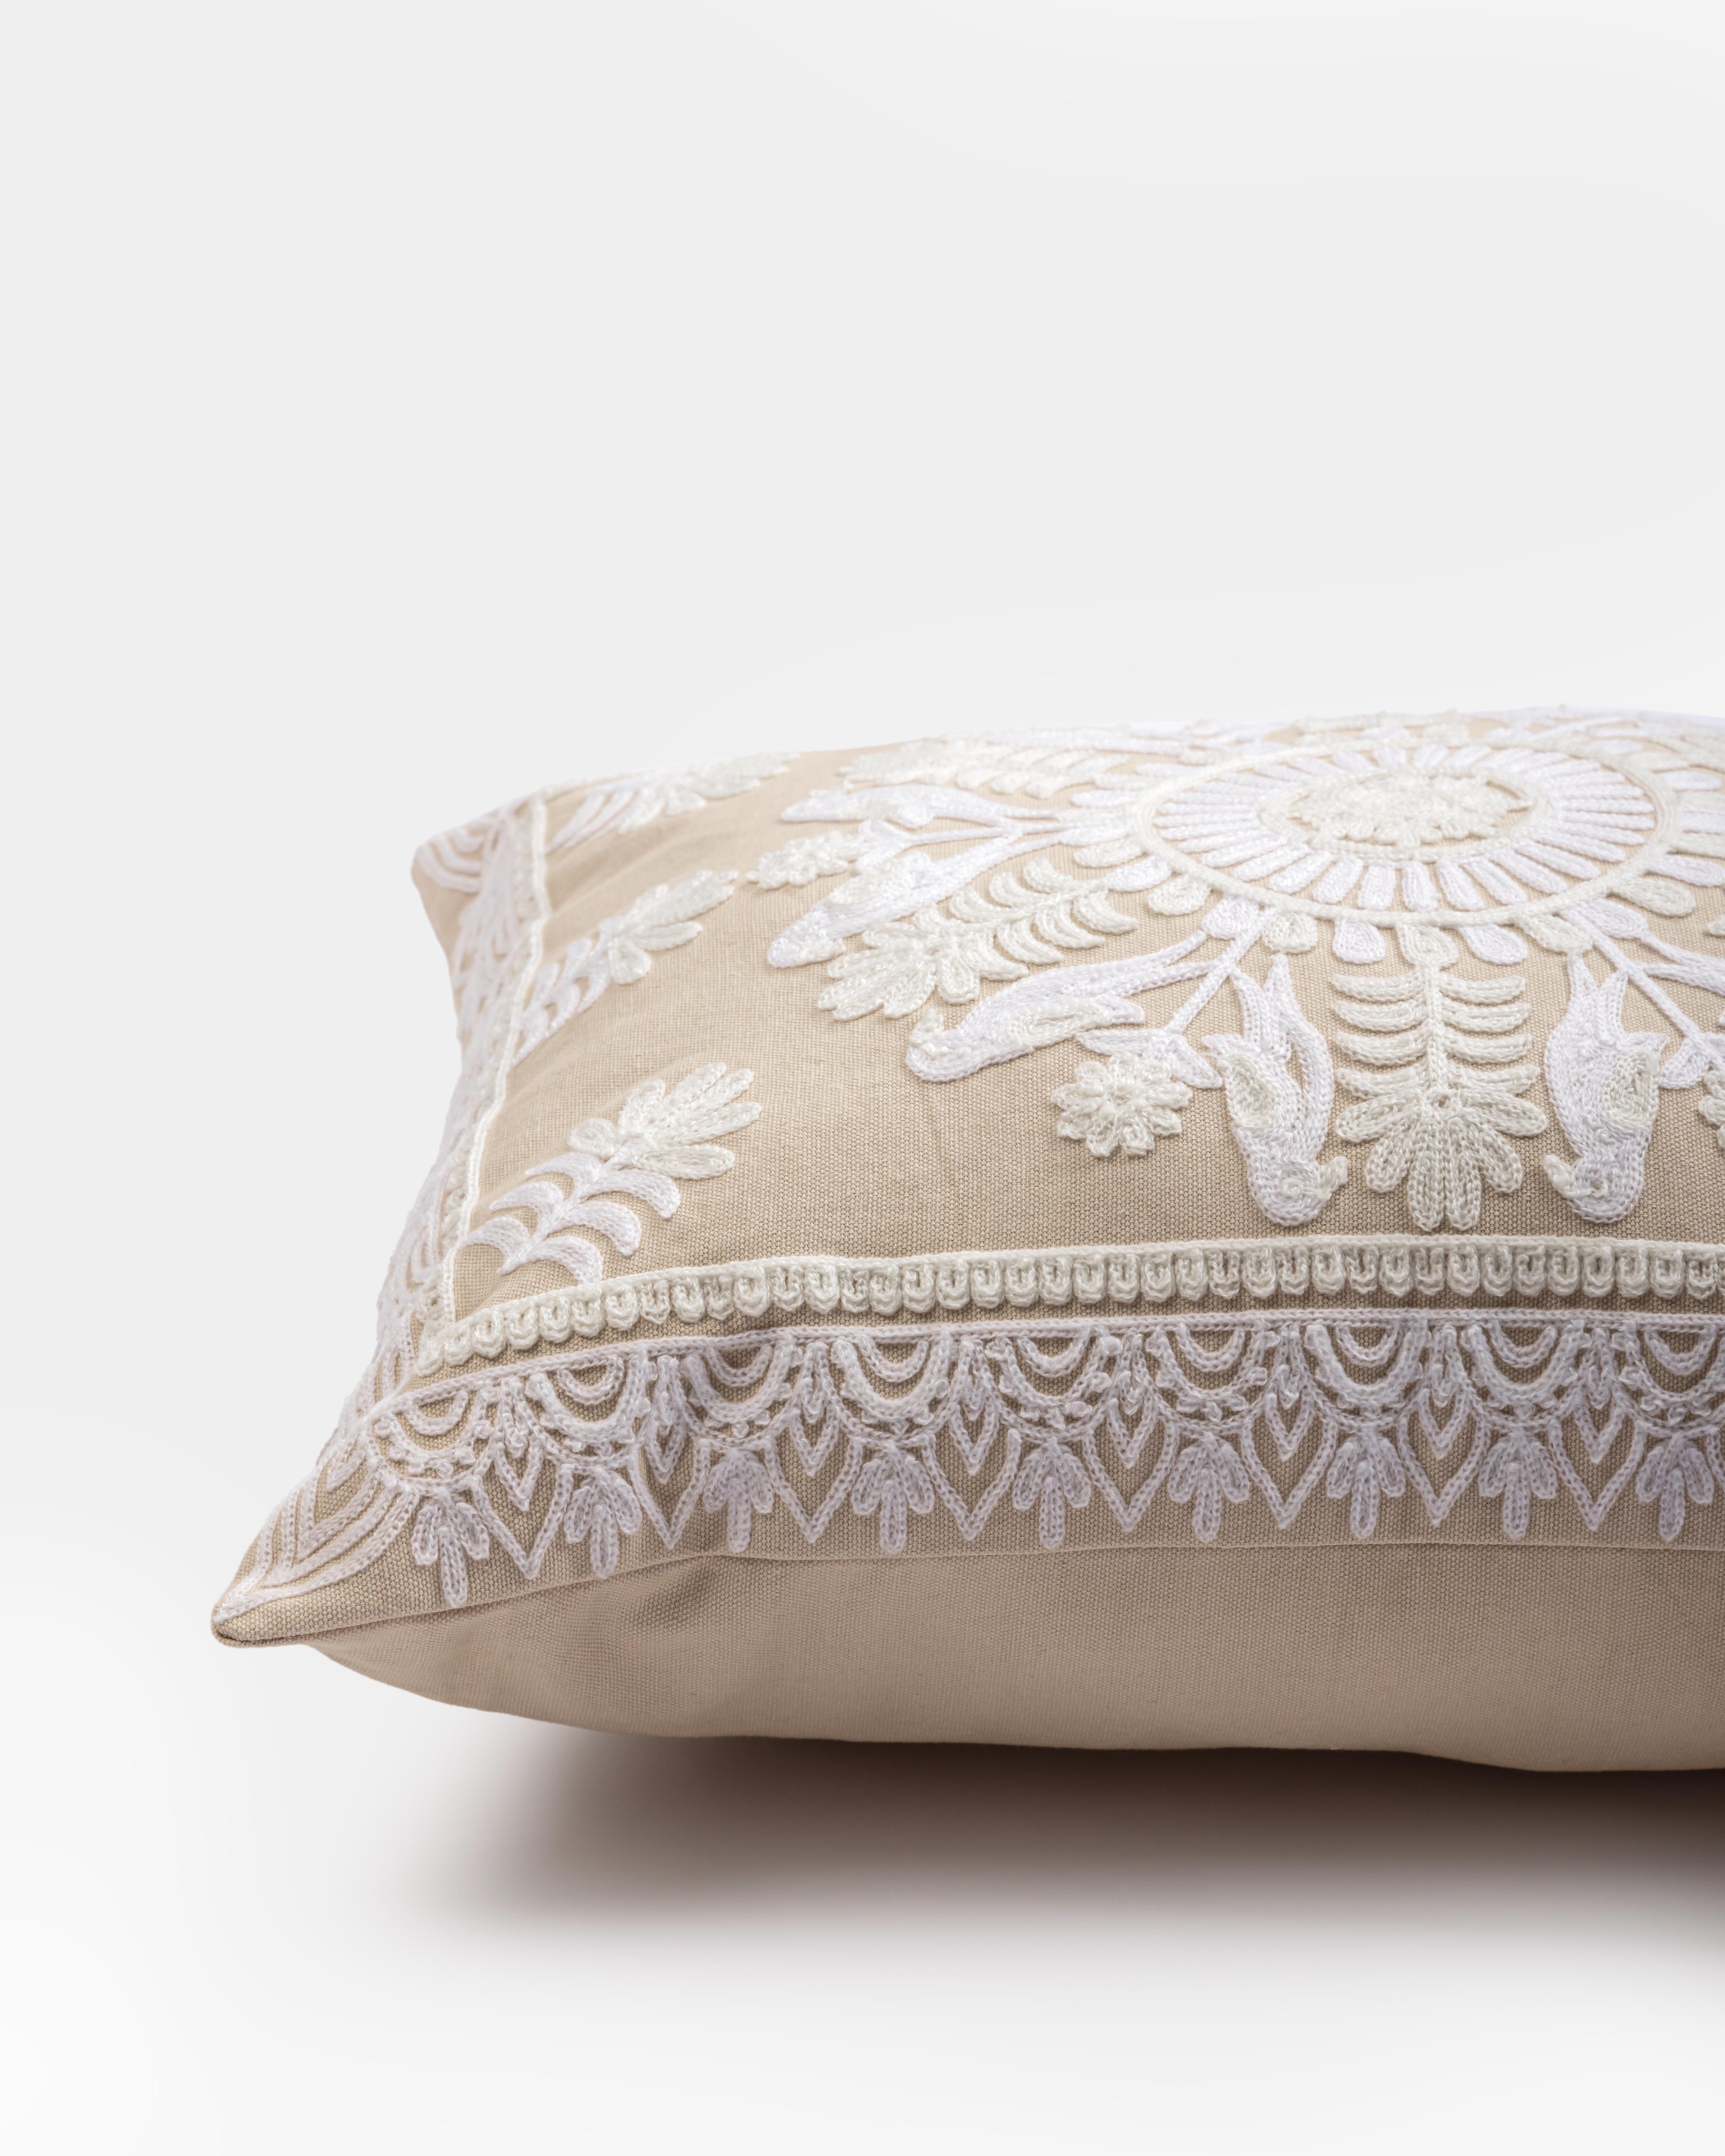 Suzani Pillow | White Pillow Cover Fauna 16x20" | Made in Jaipur